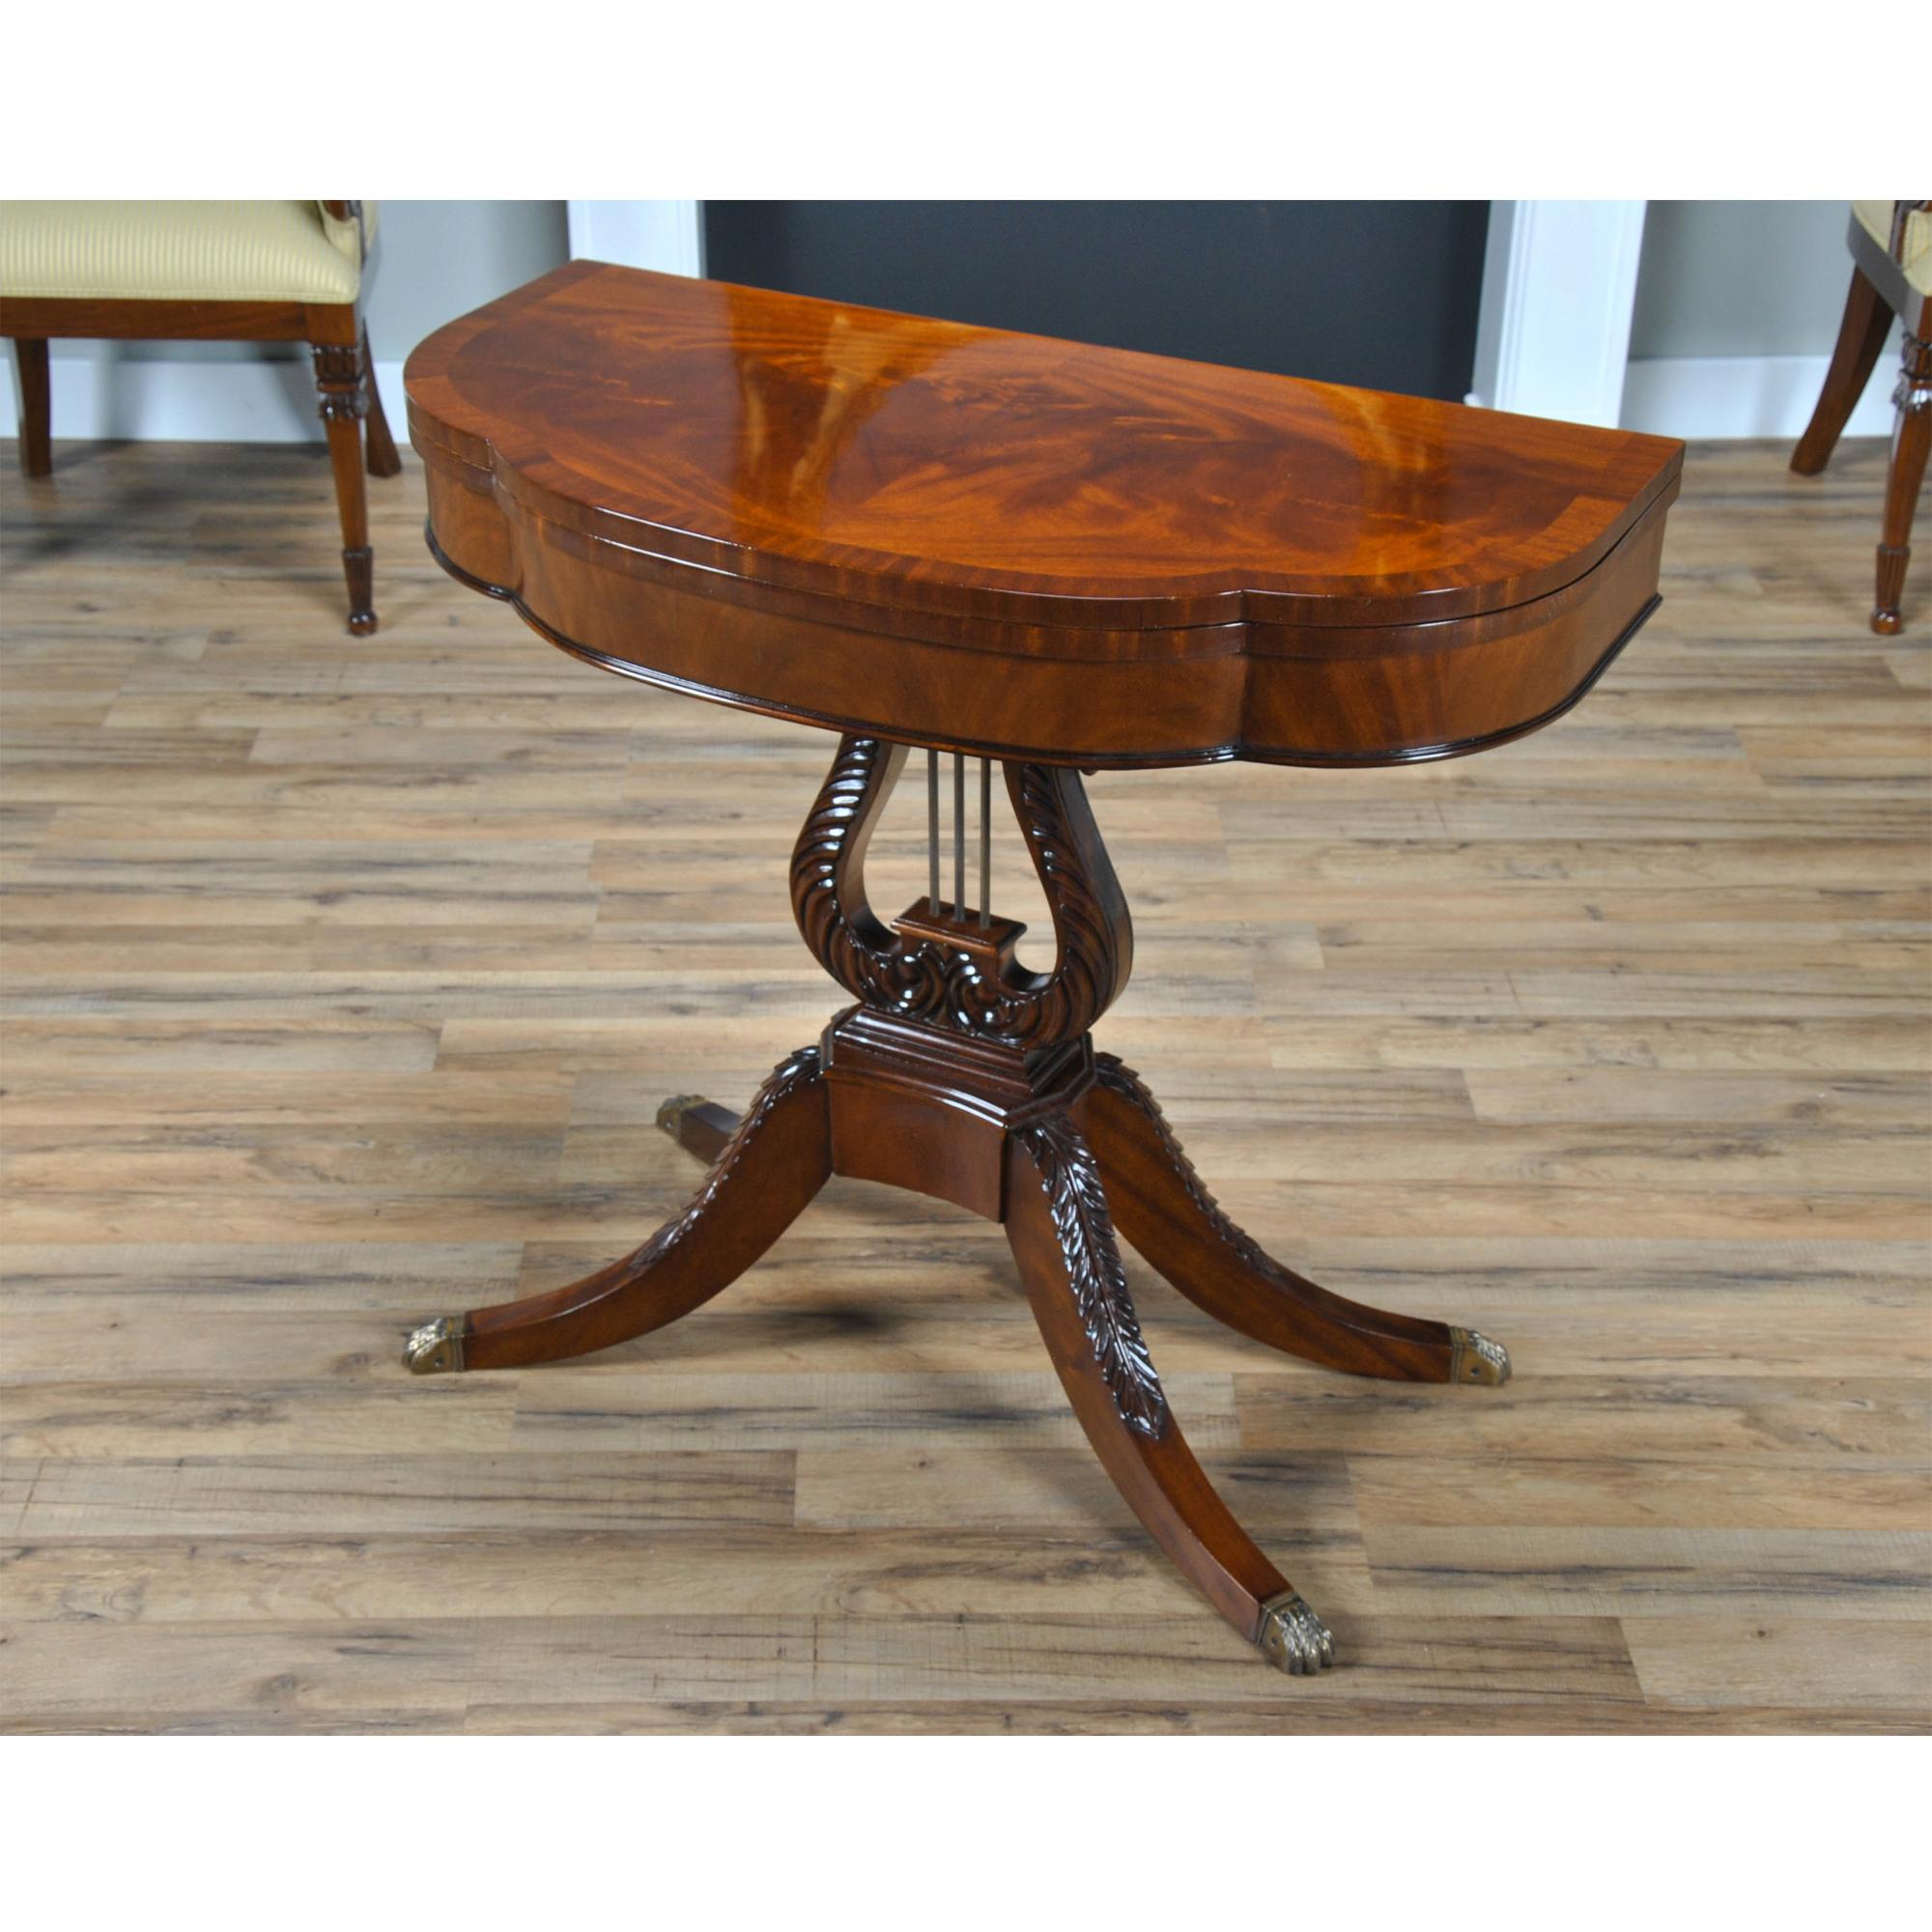 An antique reproduction Lyre or Harp Game Table inspired by a Duncan Phyfe design this high quality item is both decorative and versatile. The table can be used with the top in the closed position as a hallway or entrance piece, it can also be